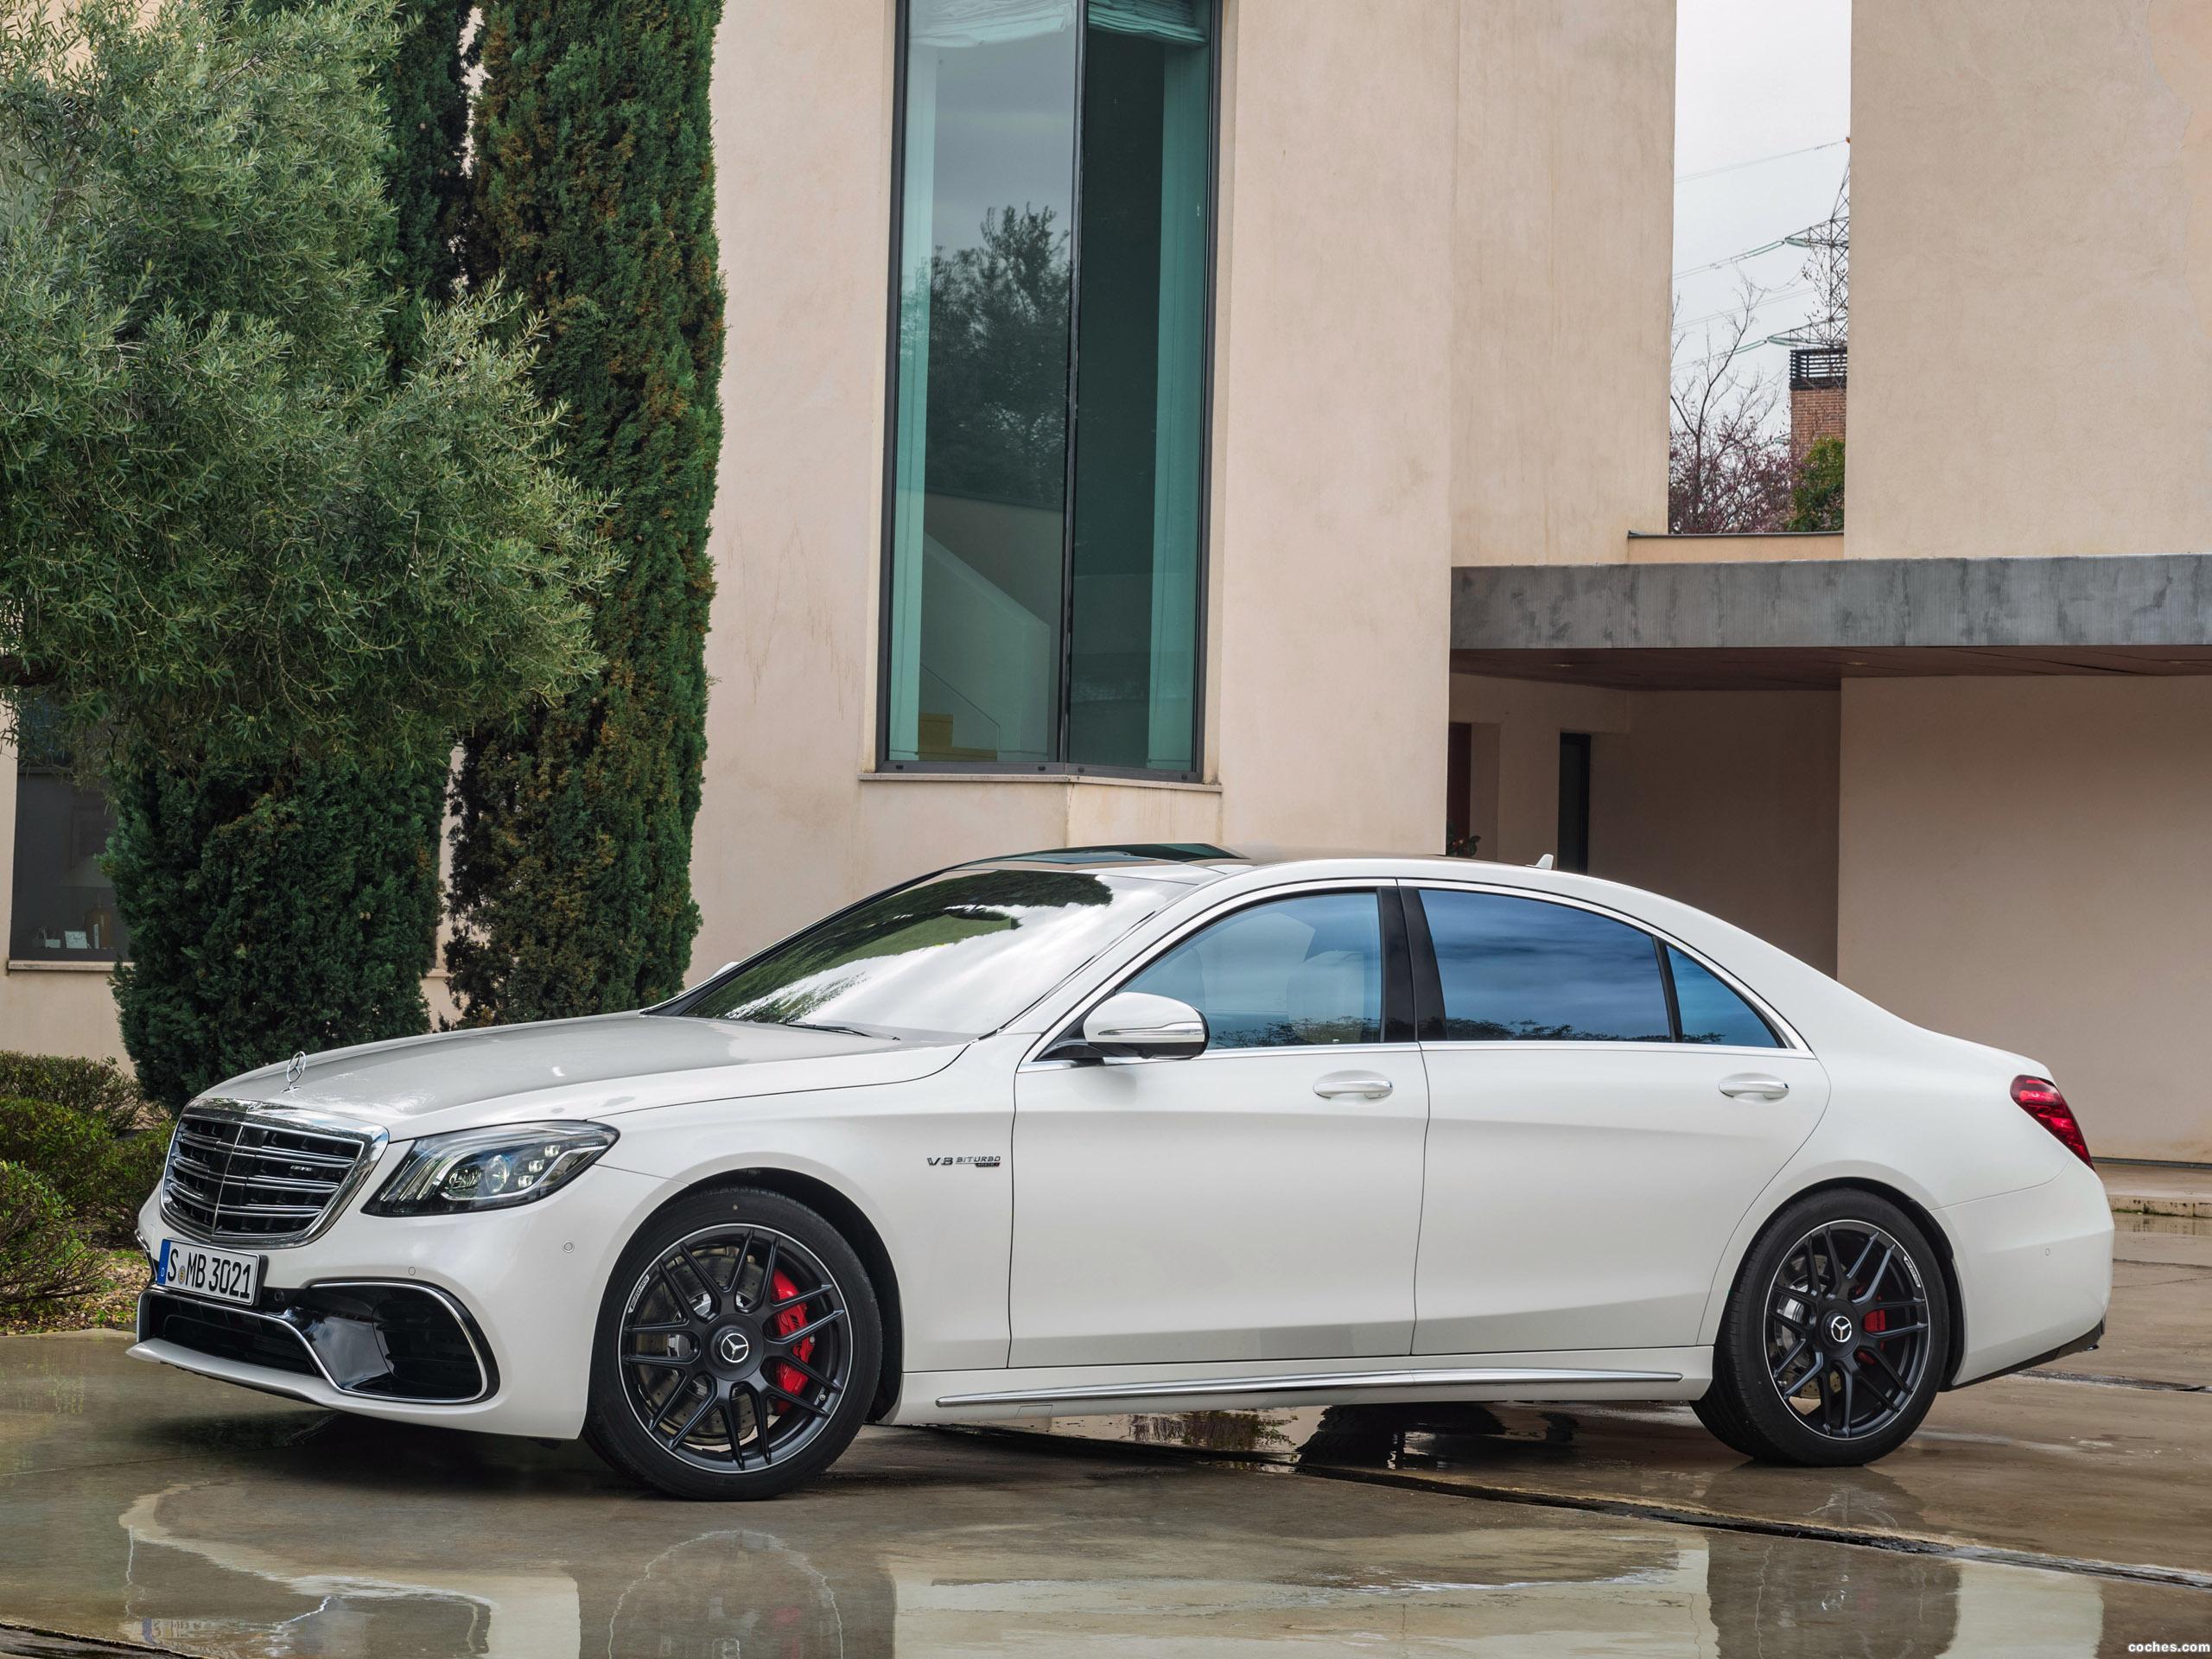 S класс amg. Mercedes Benz AMG s63 4matic. Mercedes Benz s63 AMG w222. Мерседес s 63 АМГ 222. Мерседес 222 s класс АМГ.